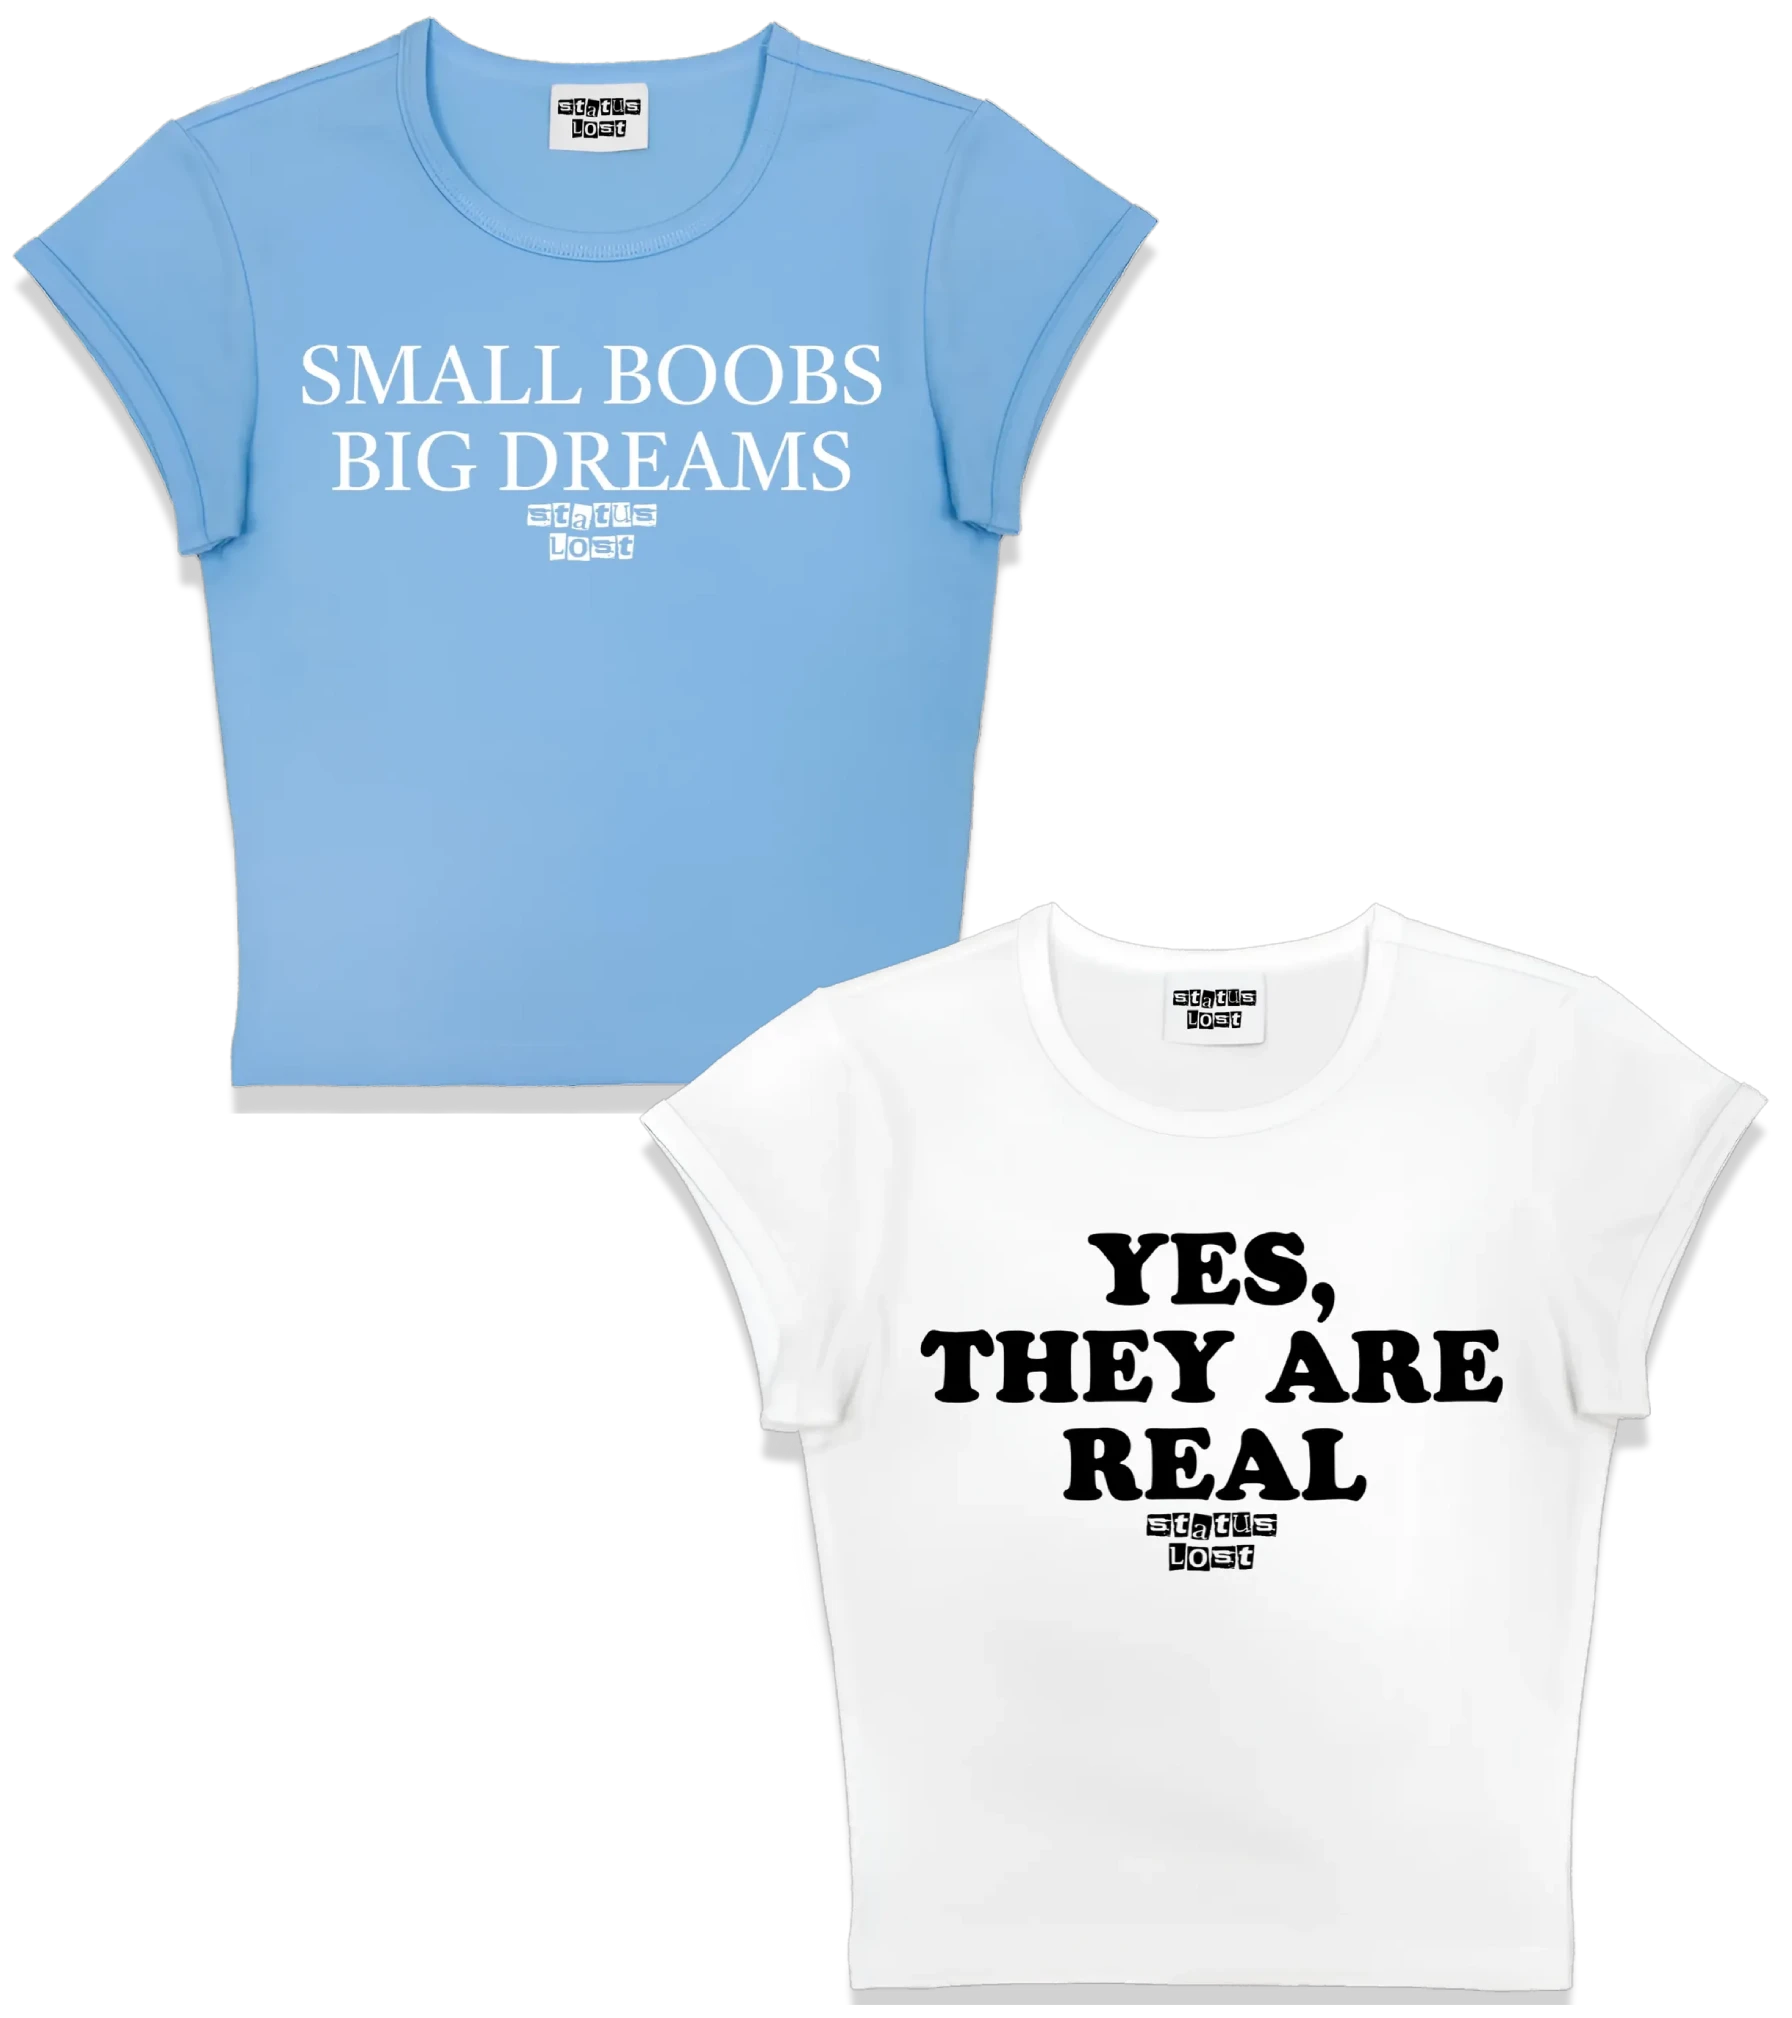 "SMALL BOOBS BIG DREAMS" & "YES THEY ARE REAL" Matching Duo